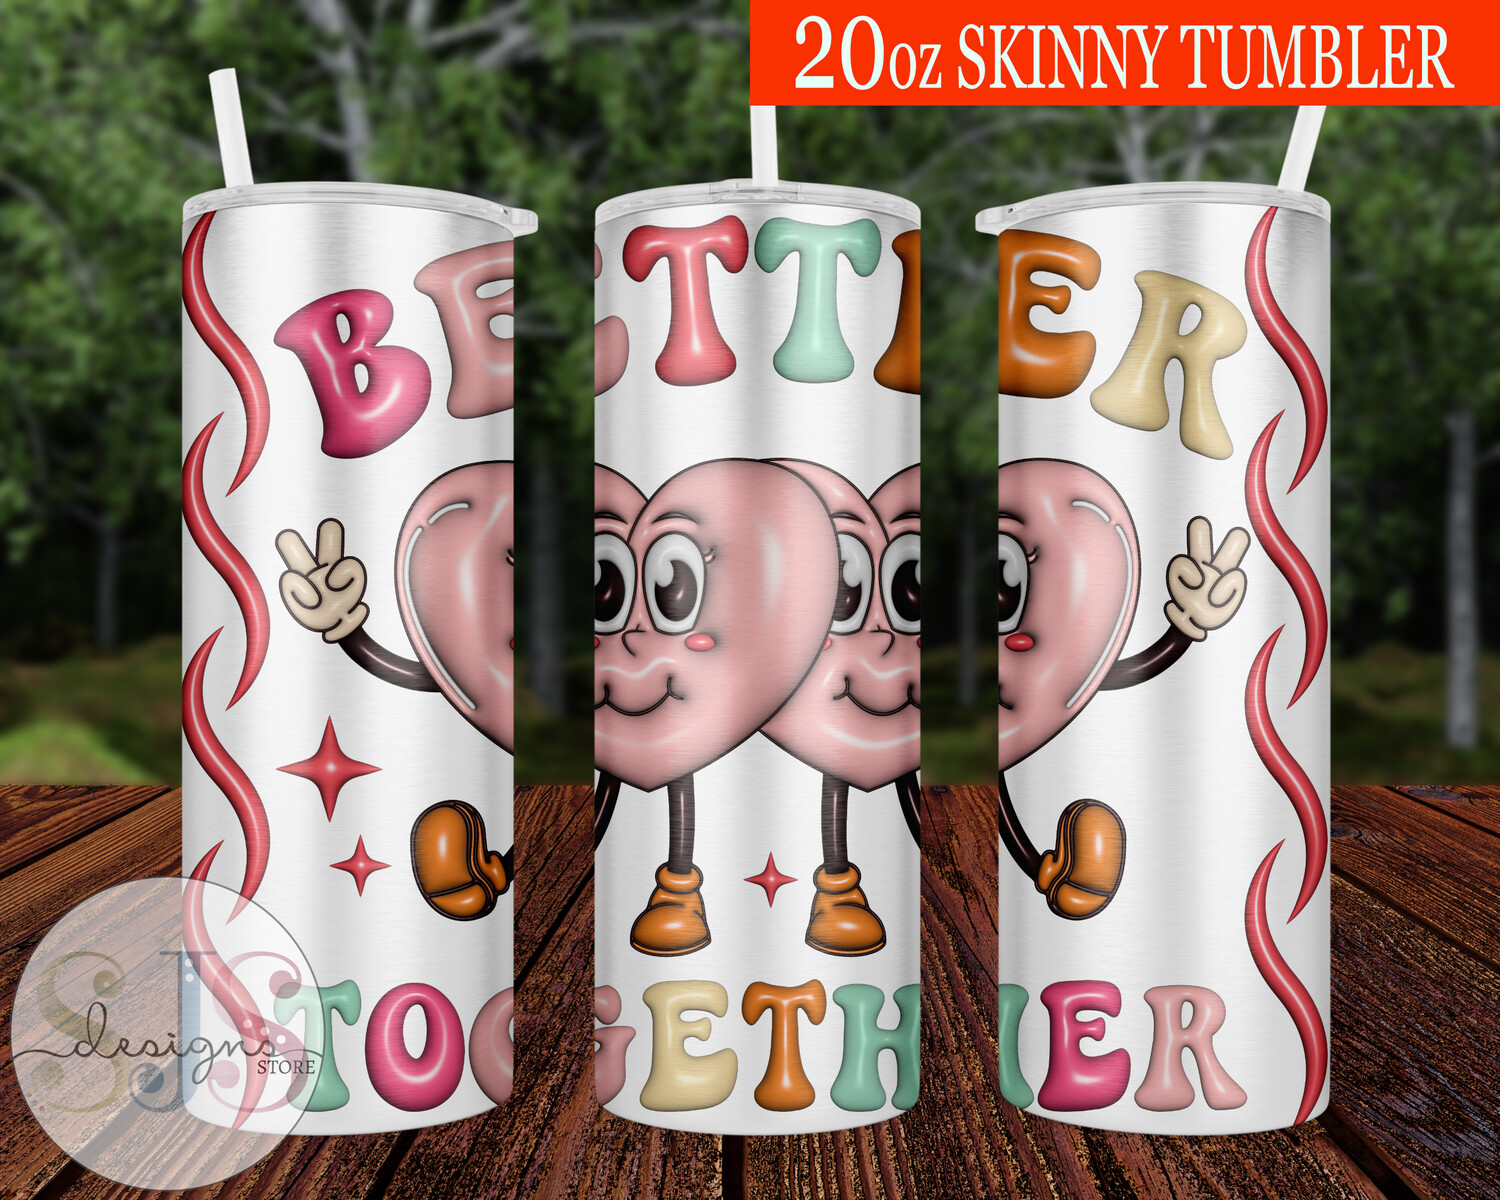 Better Together 3D Inflated 20oz Tumbler